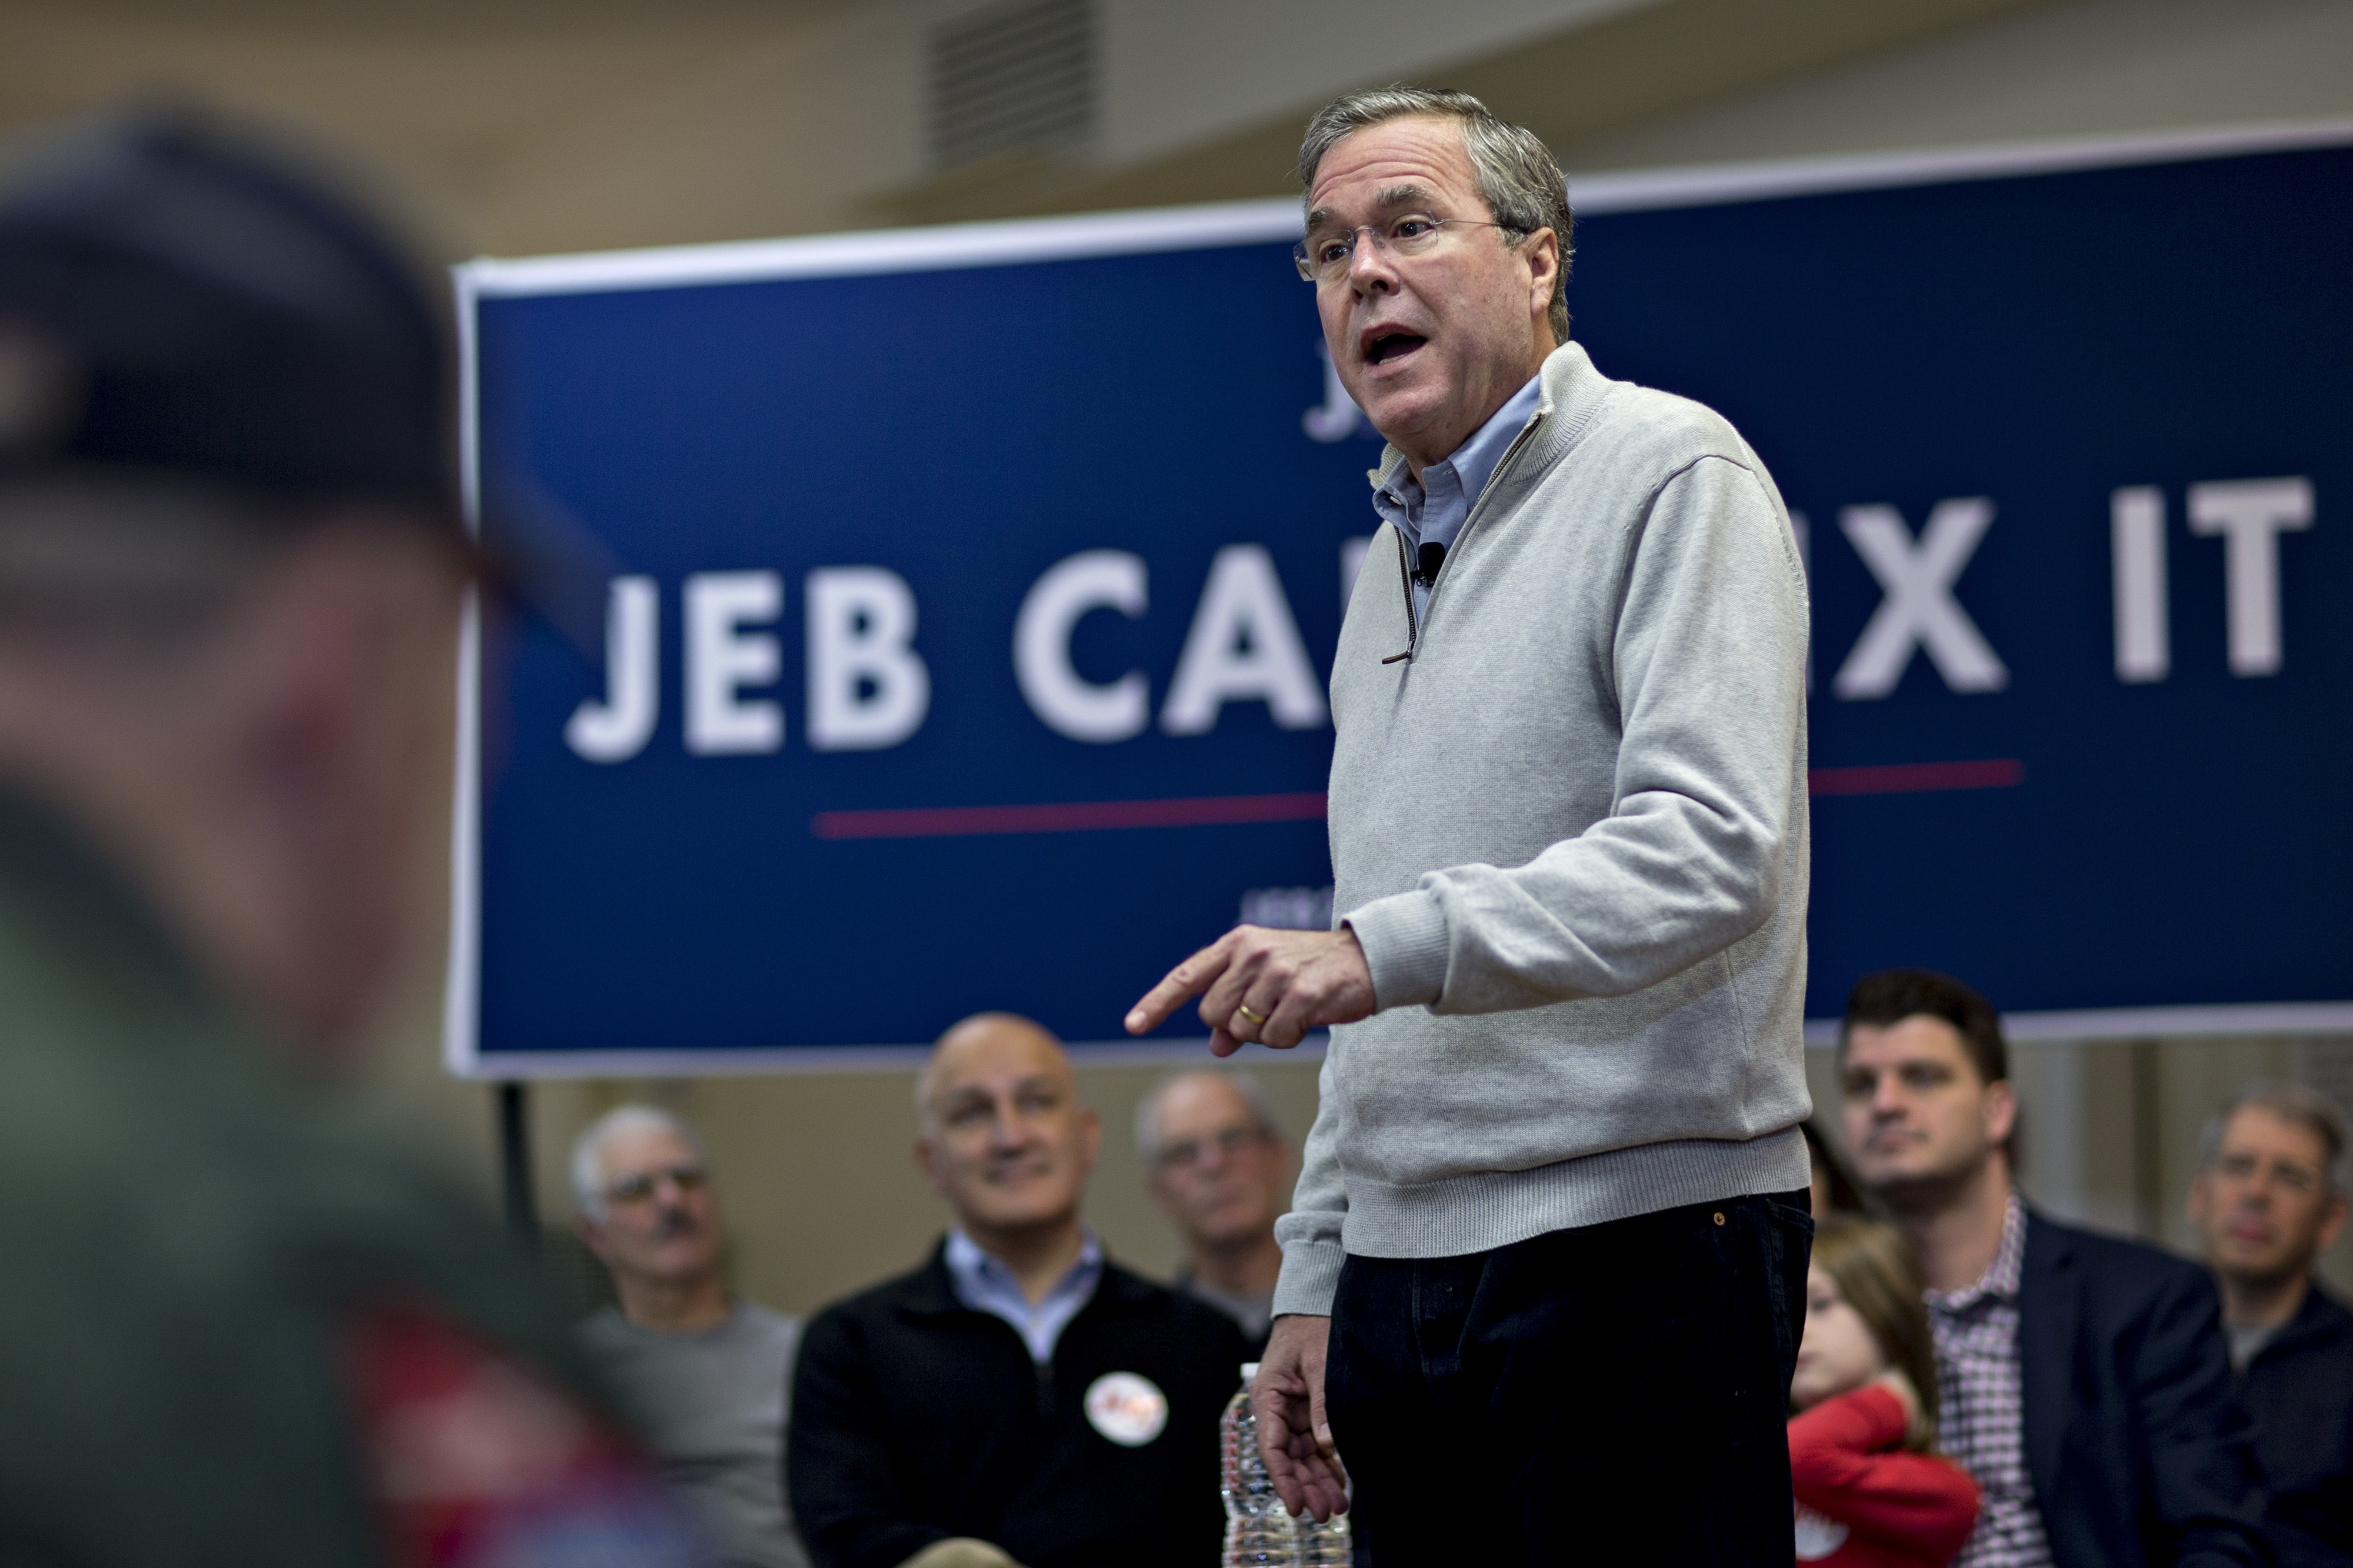 Jeb Bush, former governor of Florida and 2016 Republican presidential candidate, speaks during a town hall campaign stop at the E. Roger Montgomery American Legion Post 81 in Contoocook, New Hampshire, U.S. on Saturday, Dec. 19, 2015. At Tuesday's presidential debate this week Bush lobbed six full-frontal assaults on front-runner Donald Trump, who he at one point dubbed Trump a "chaos candidate." (Bloomberg—Bloomberg via Getty Images)